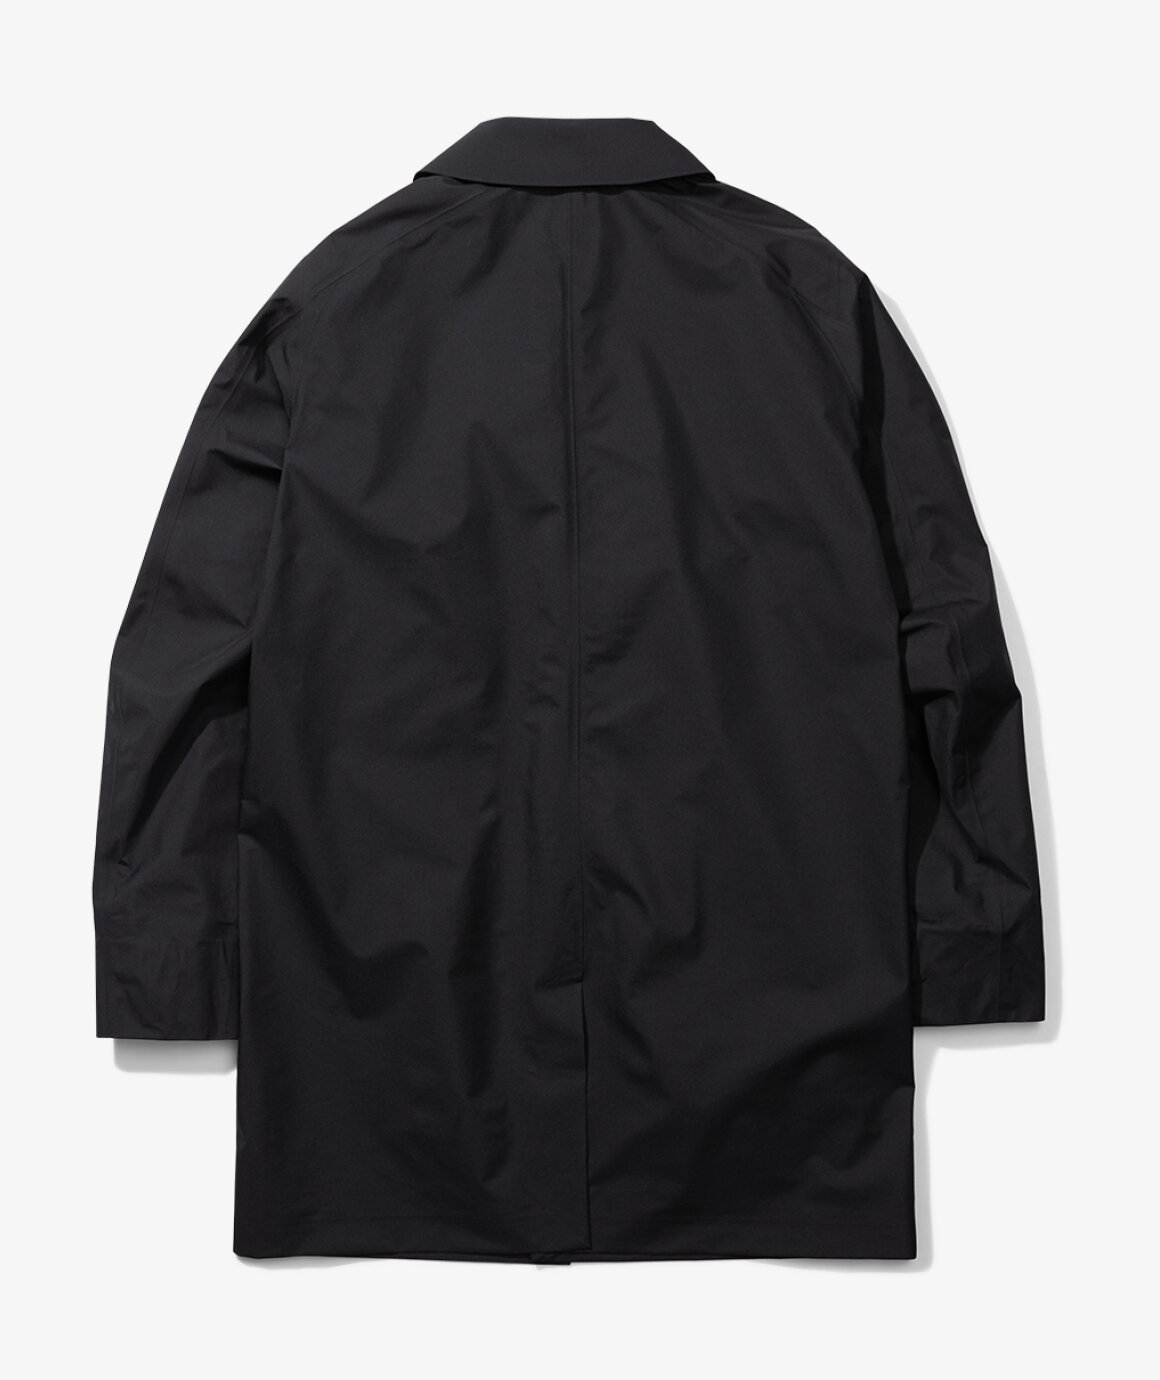 Norse Store | Shipping Worldwide - Partition LT Coat by Veilance